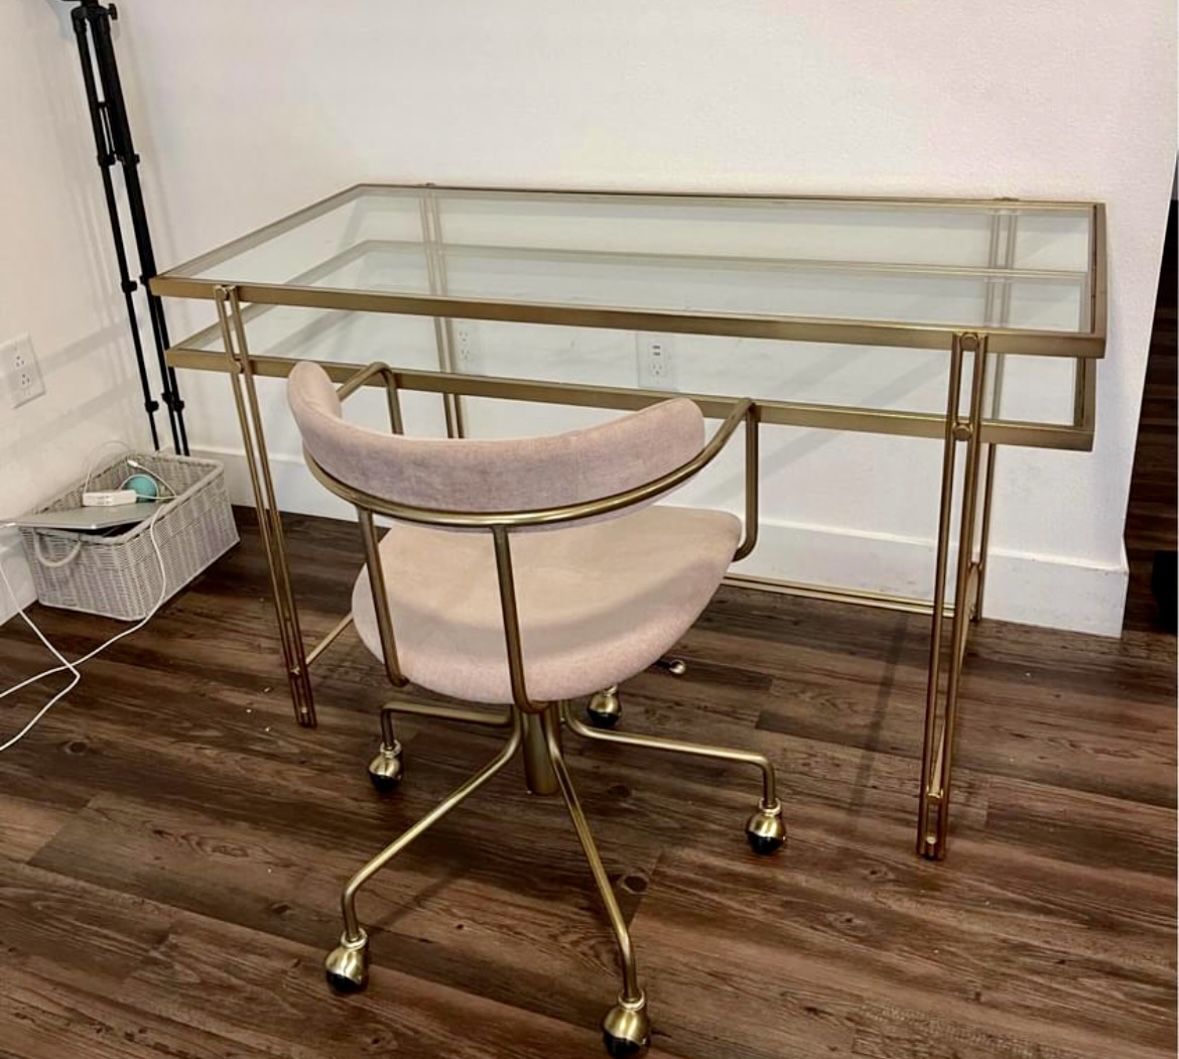 Glass and Brass Frame Two-Tier Desk by West Elm